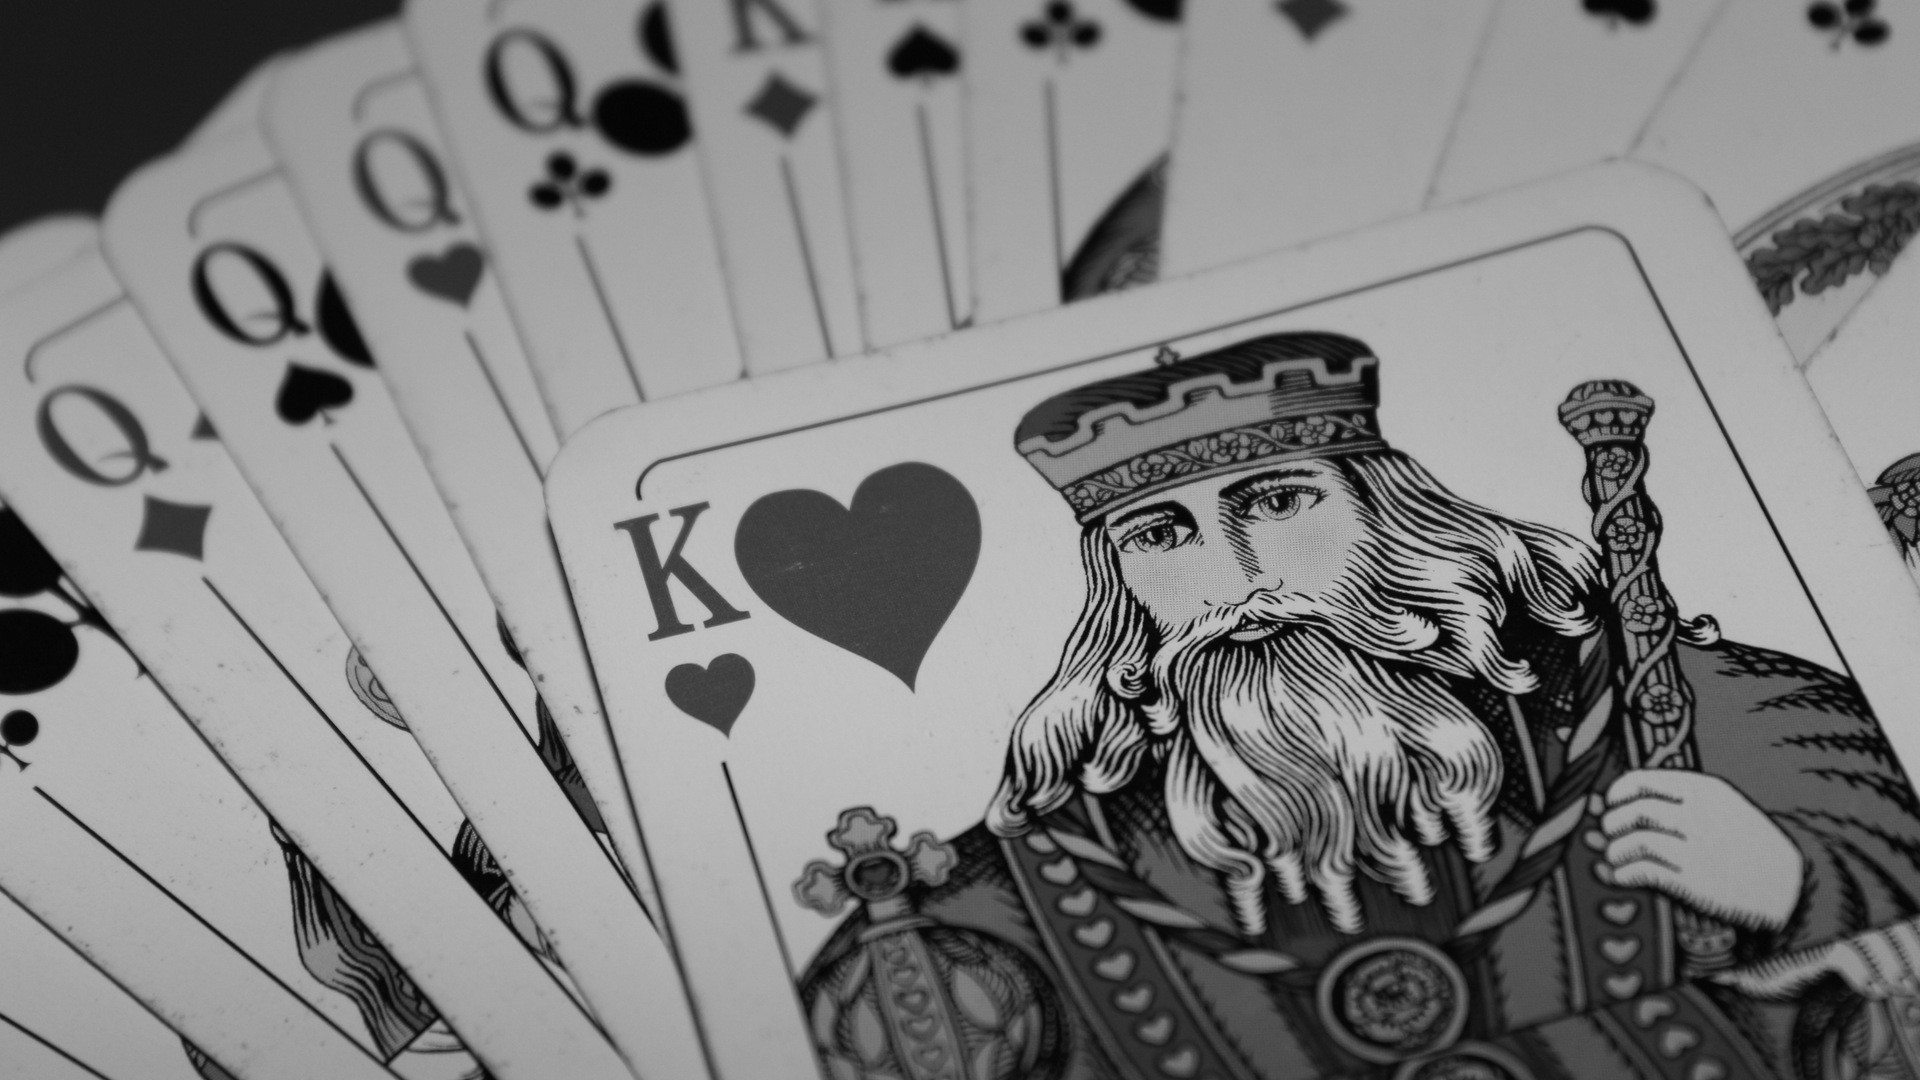 General 1920x1080 playing cards king monochrome digital art simple background